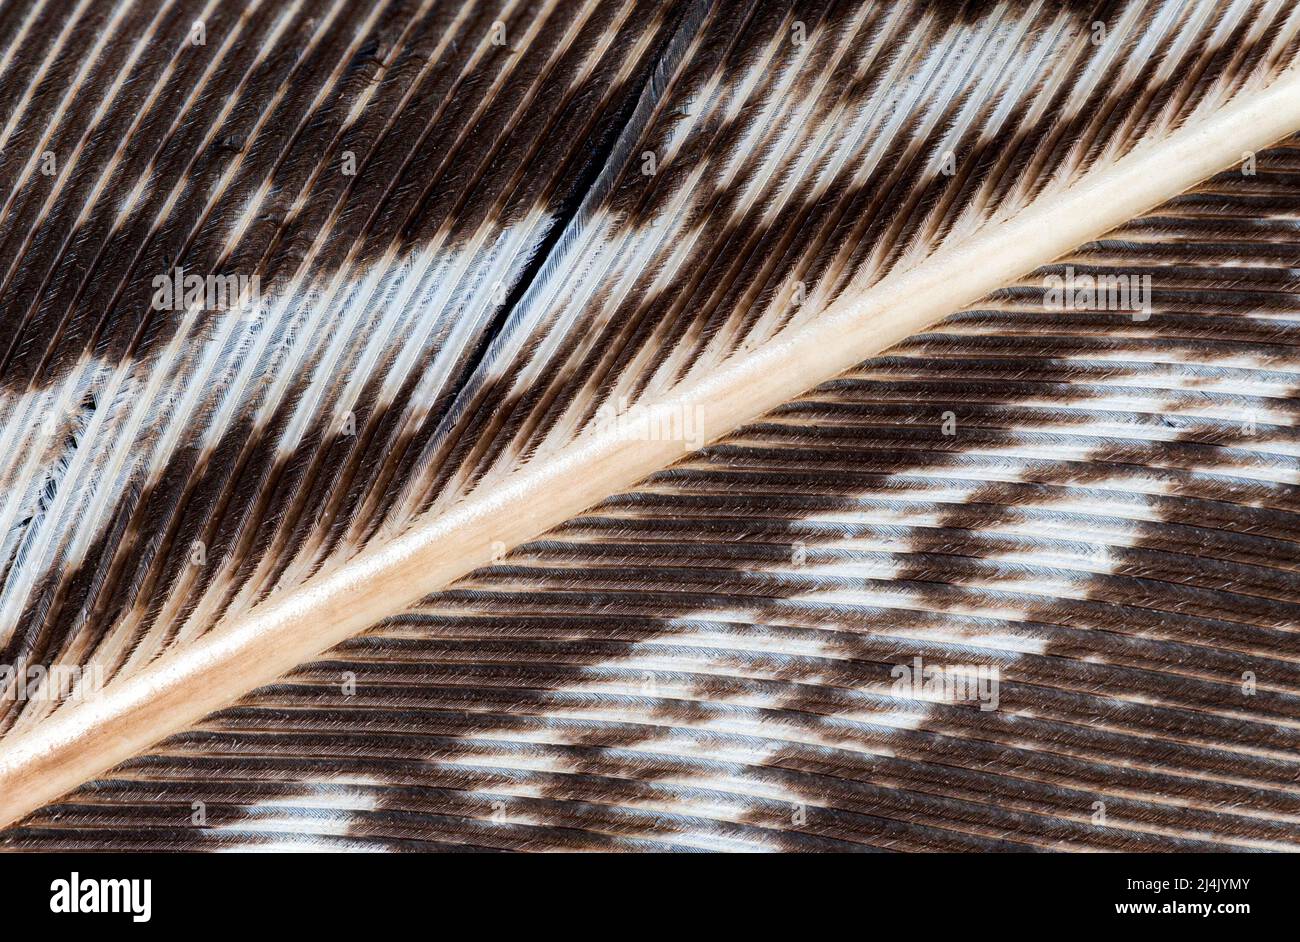 Extreme close up of the barbs on a mottled brown and white feather Stock Photo